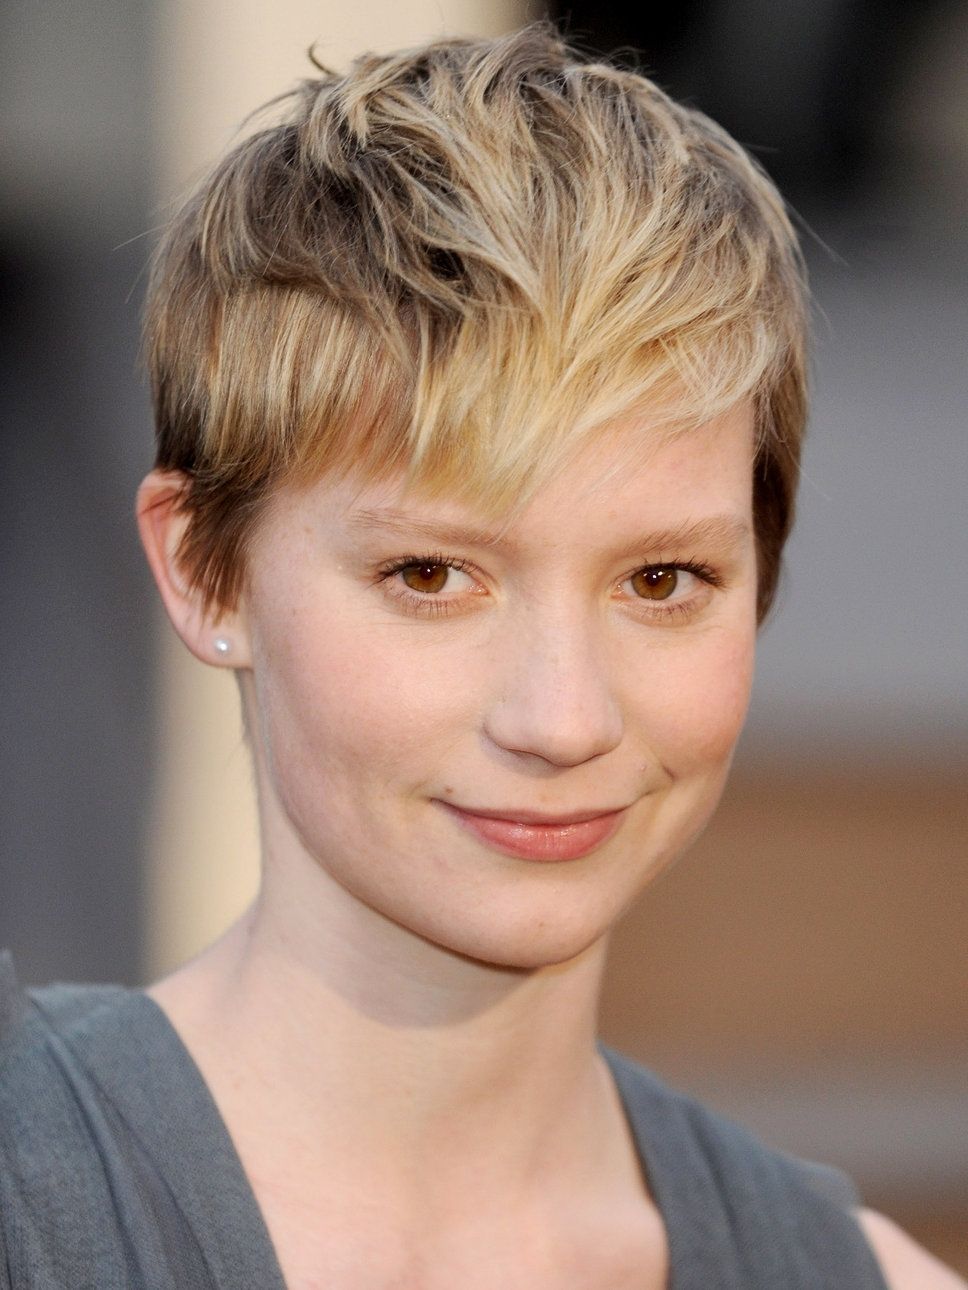 Straight Hairstyles For College Cute Short Pixie Hairstyles 2011 7 With Most Current Short Pixie Hairstyles For Straight Hair (View 2 of 15)